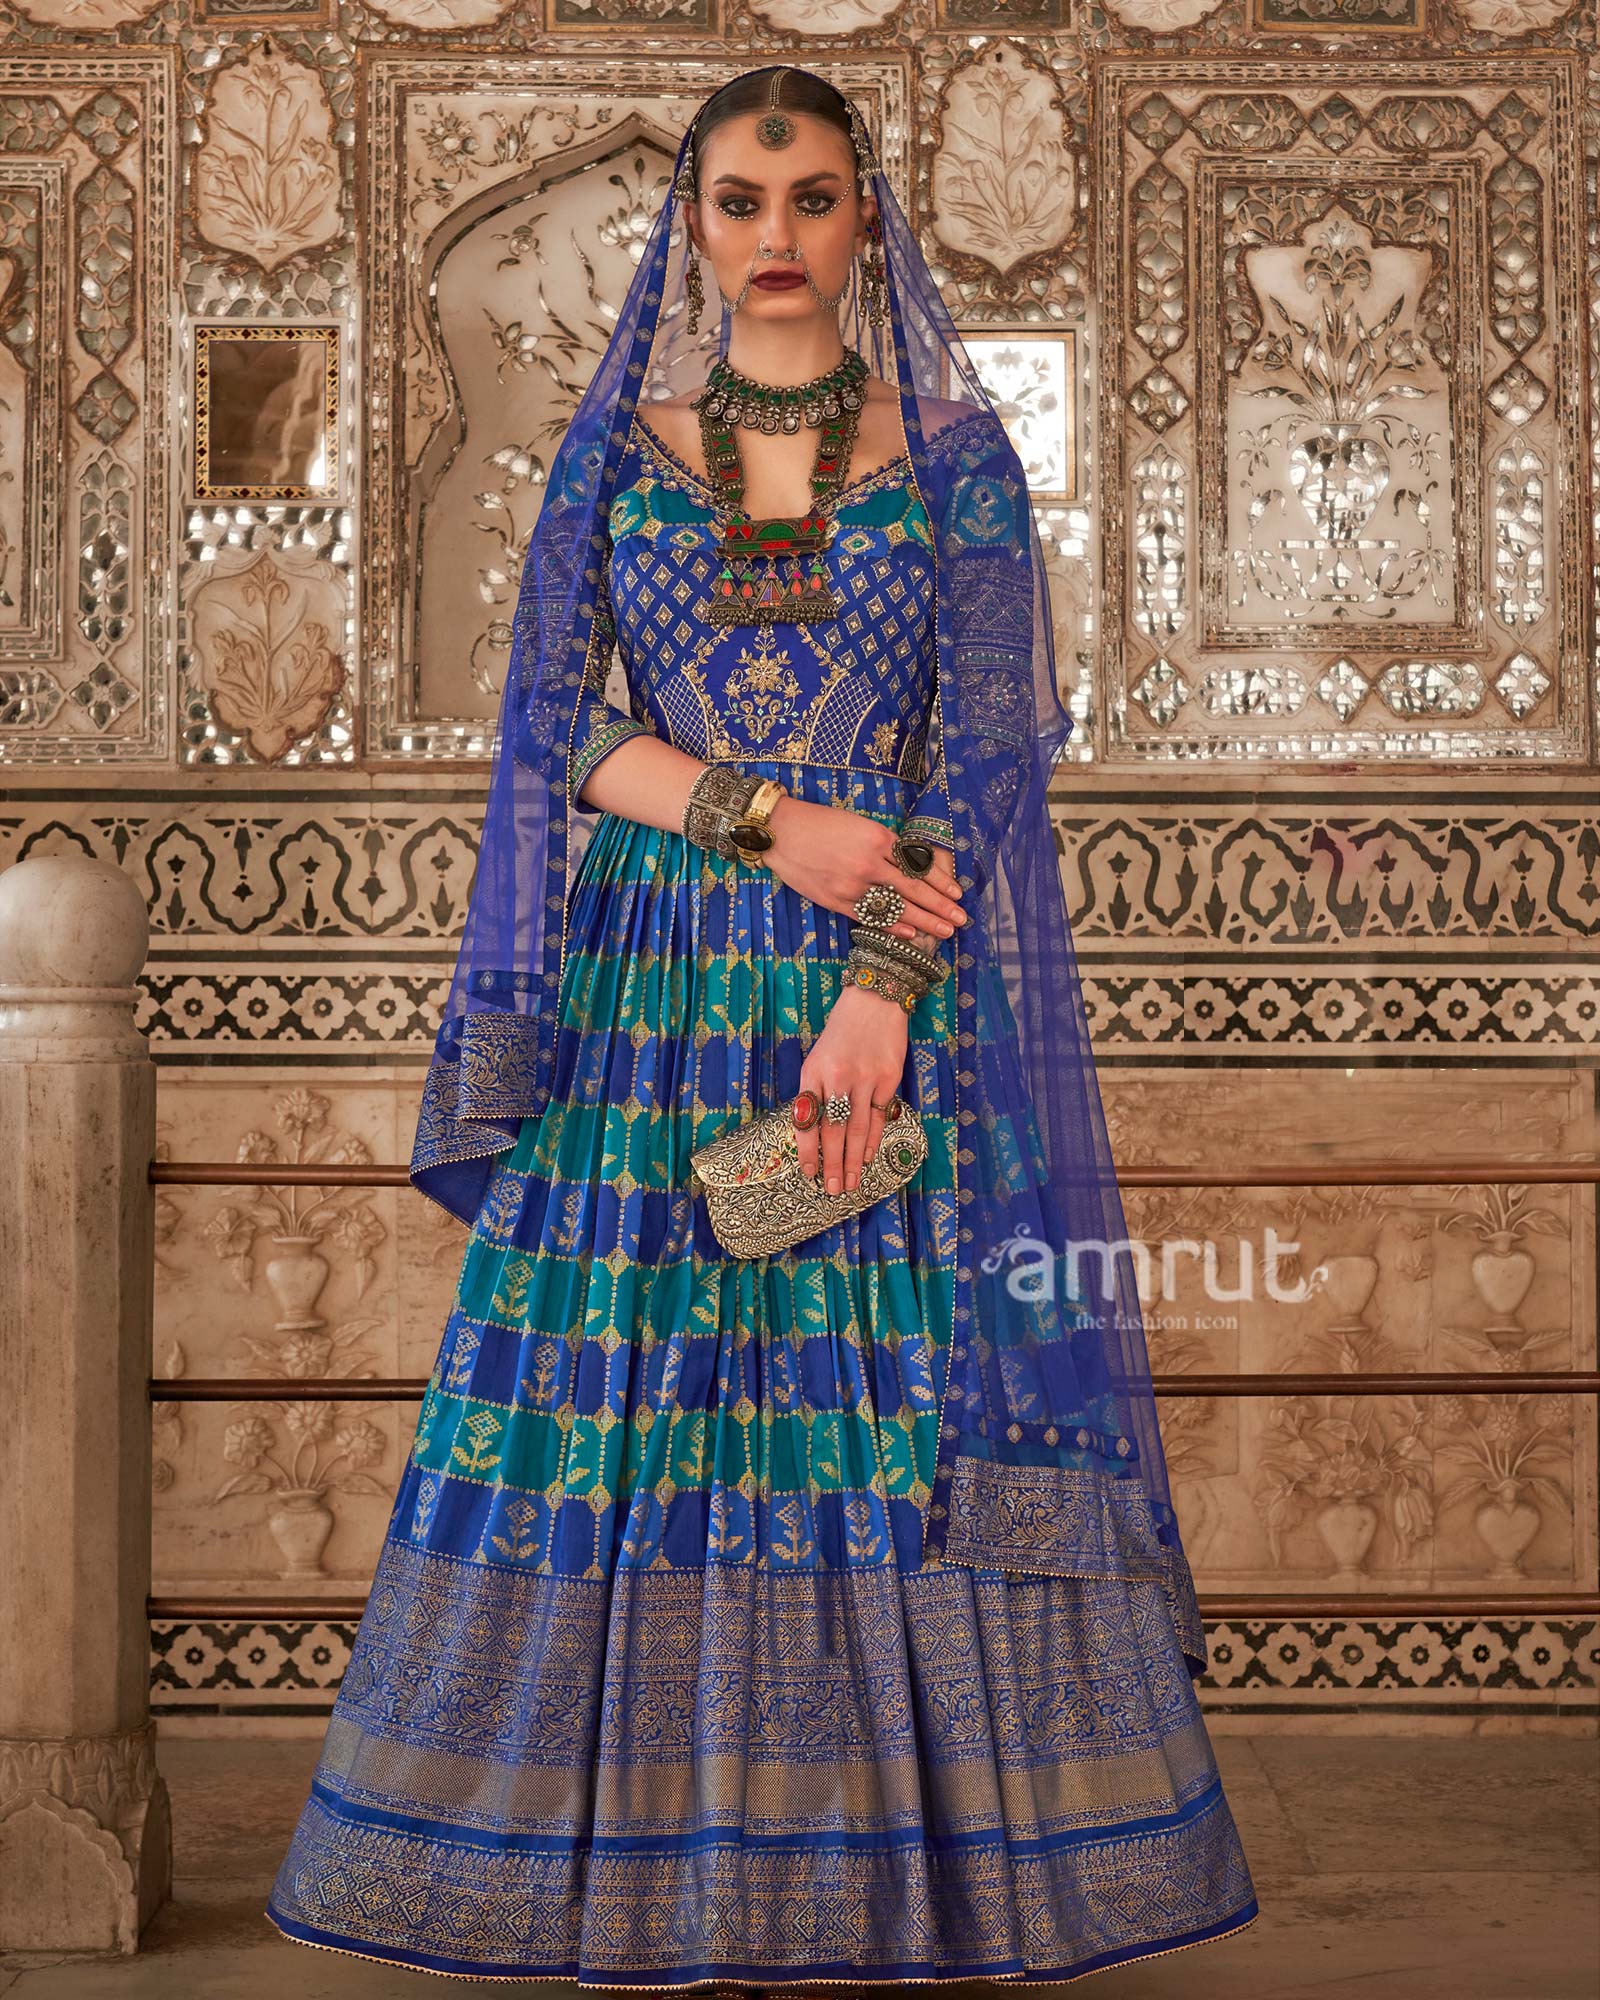 Anarkali Suits - Upto 70 % Off on Bollywood Anarrkali Online in India